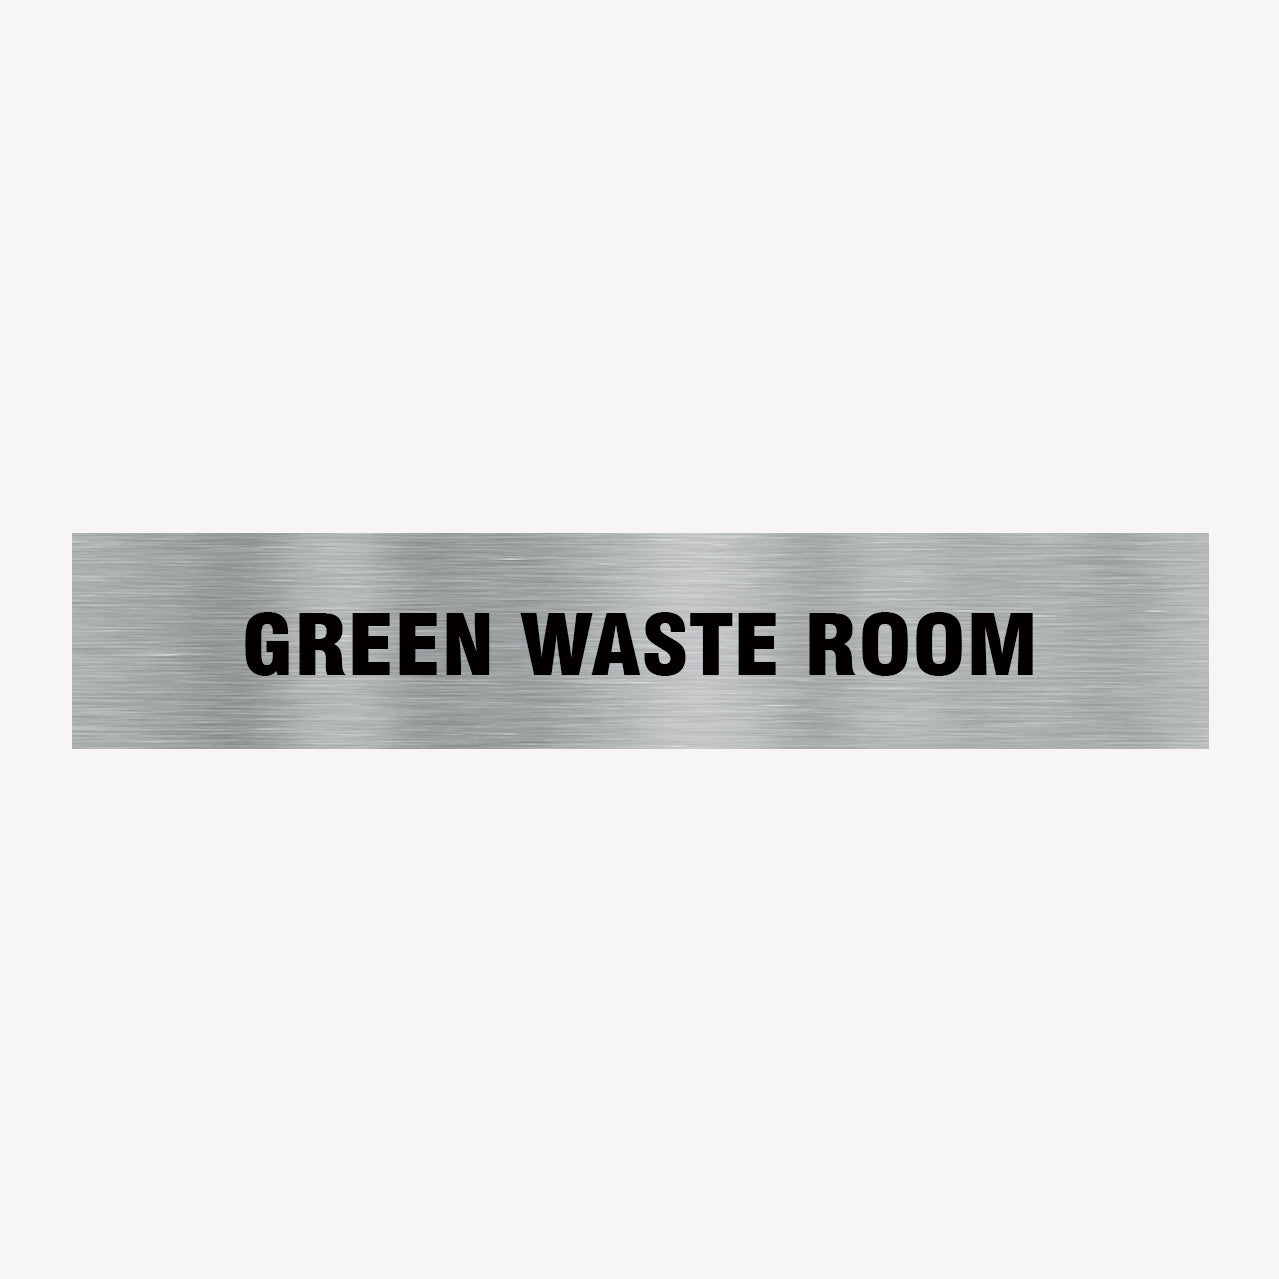 GREEN WASTE ROOM SIGN - STATUTORY SIGNS AT GET SIGNS FAST DELIVERY AROUND AUSTRALIA -  GET SIGNS ONLINE AT GET SIGNS